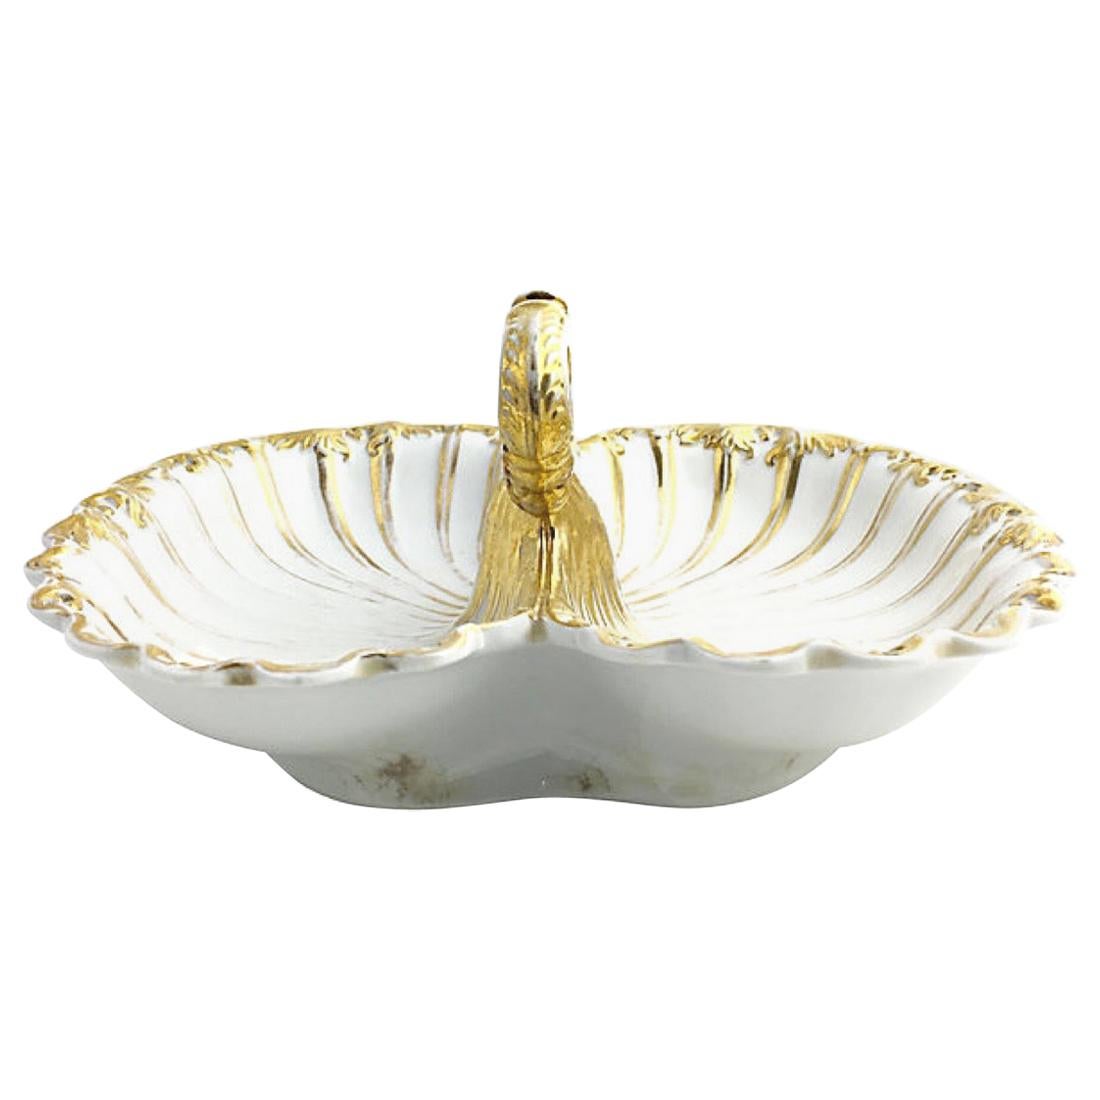 Antique Gilt Divided Shell Serving Dish with Handle by Moabit